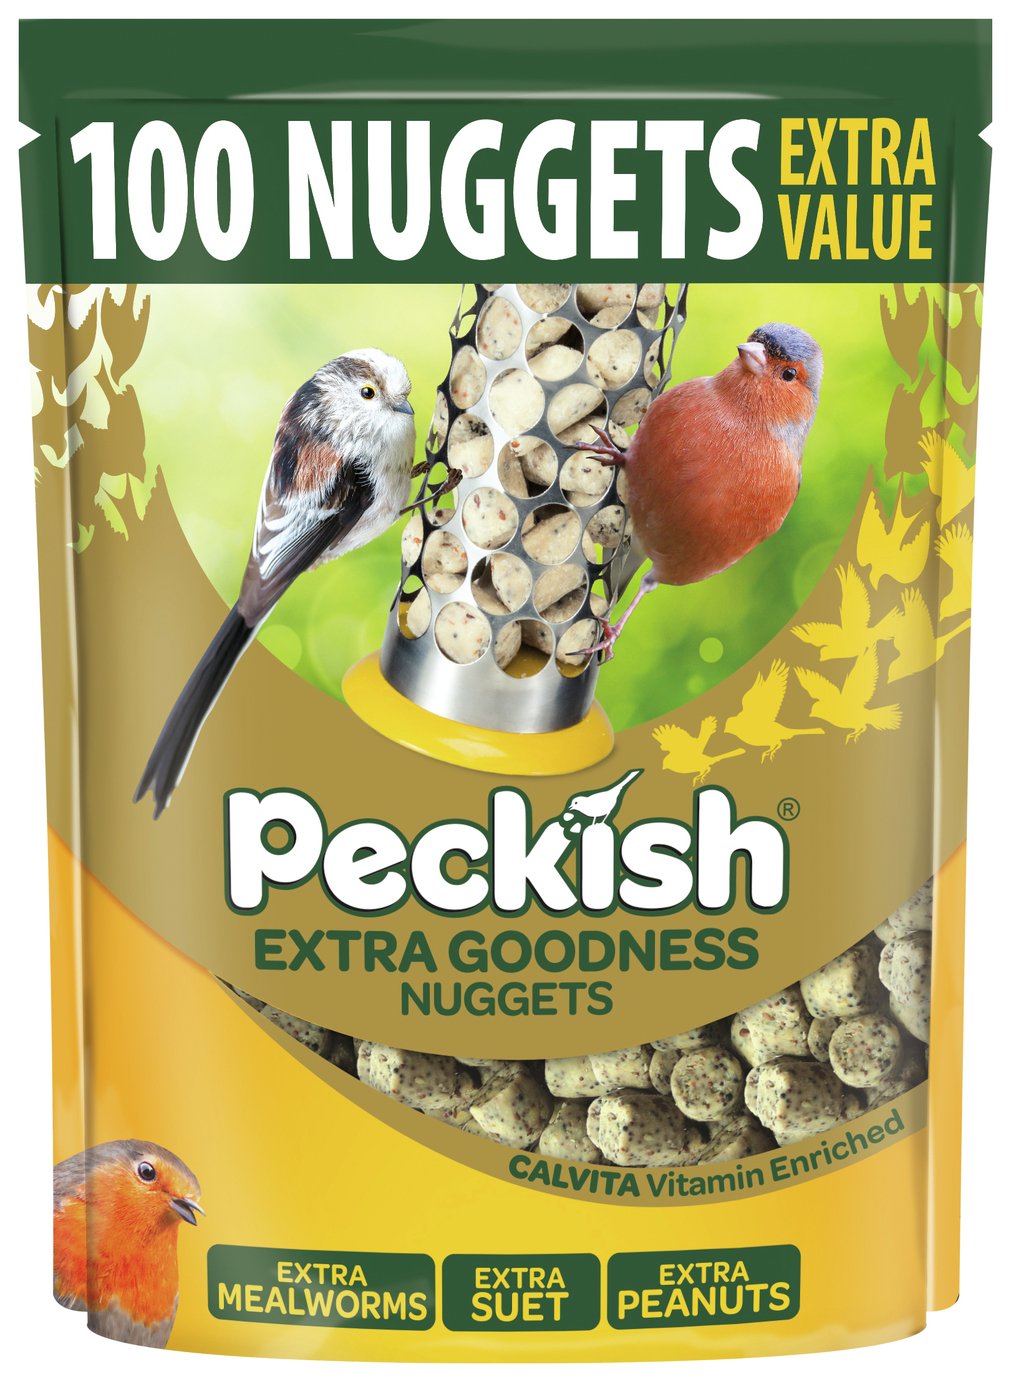 Peckish Extra Goodness 100 Nuggets